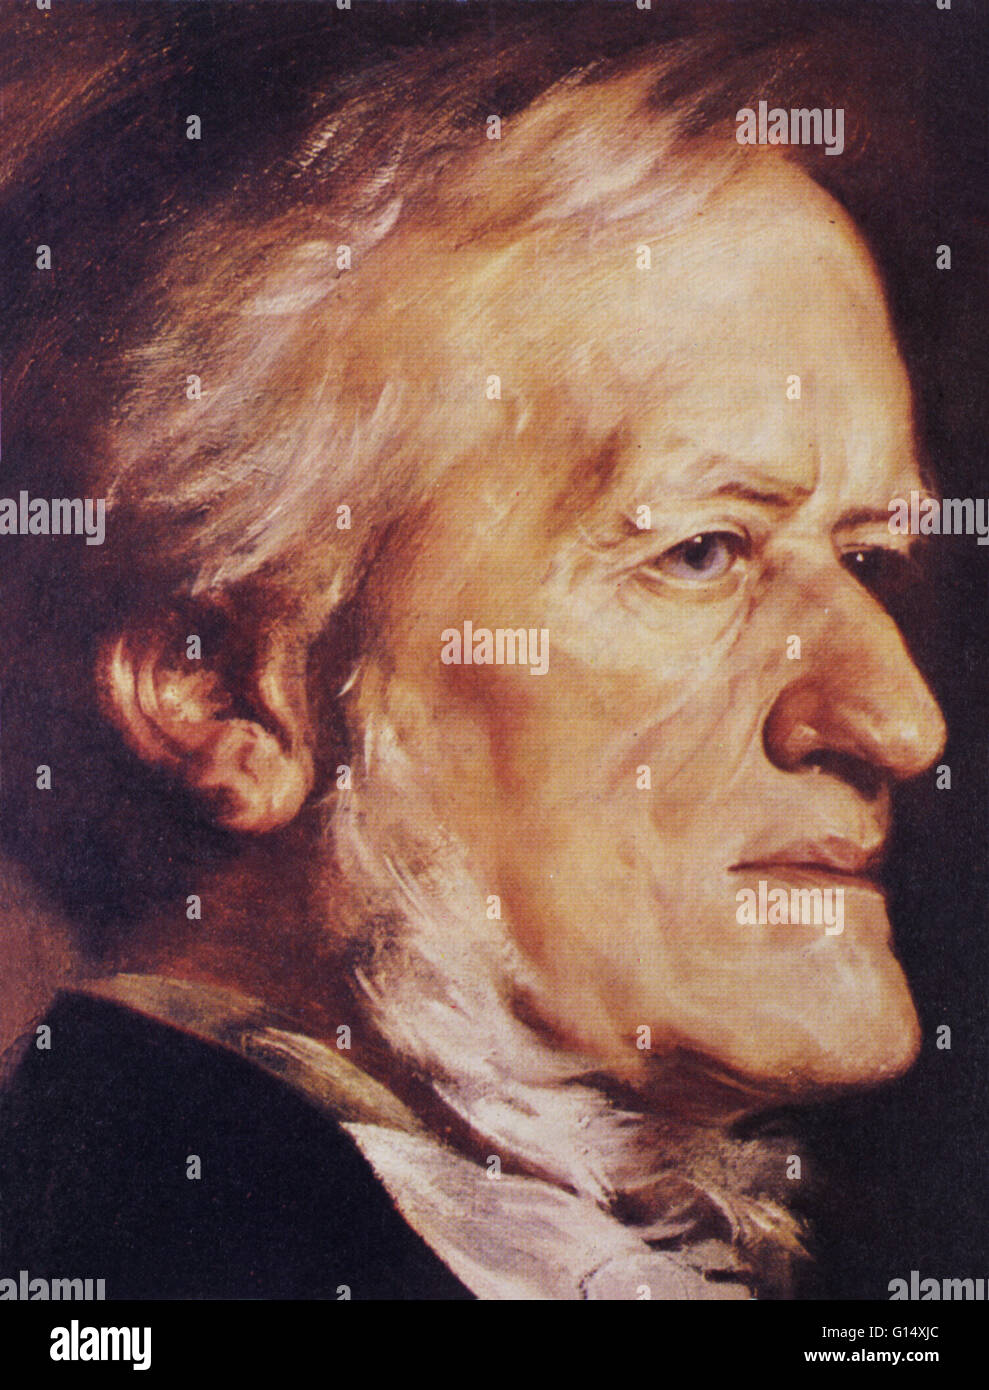 Wilhelm Richard Wagner (May 22, 1813 - February 13, 1883) was a German composer, theater director, polemicist, and conductor who is primarily known for his operas. Unlike most opera composers, Wagner wrote both the libretto and the music for each of his s Stock Photo